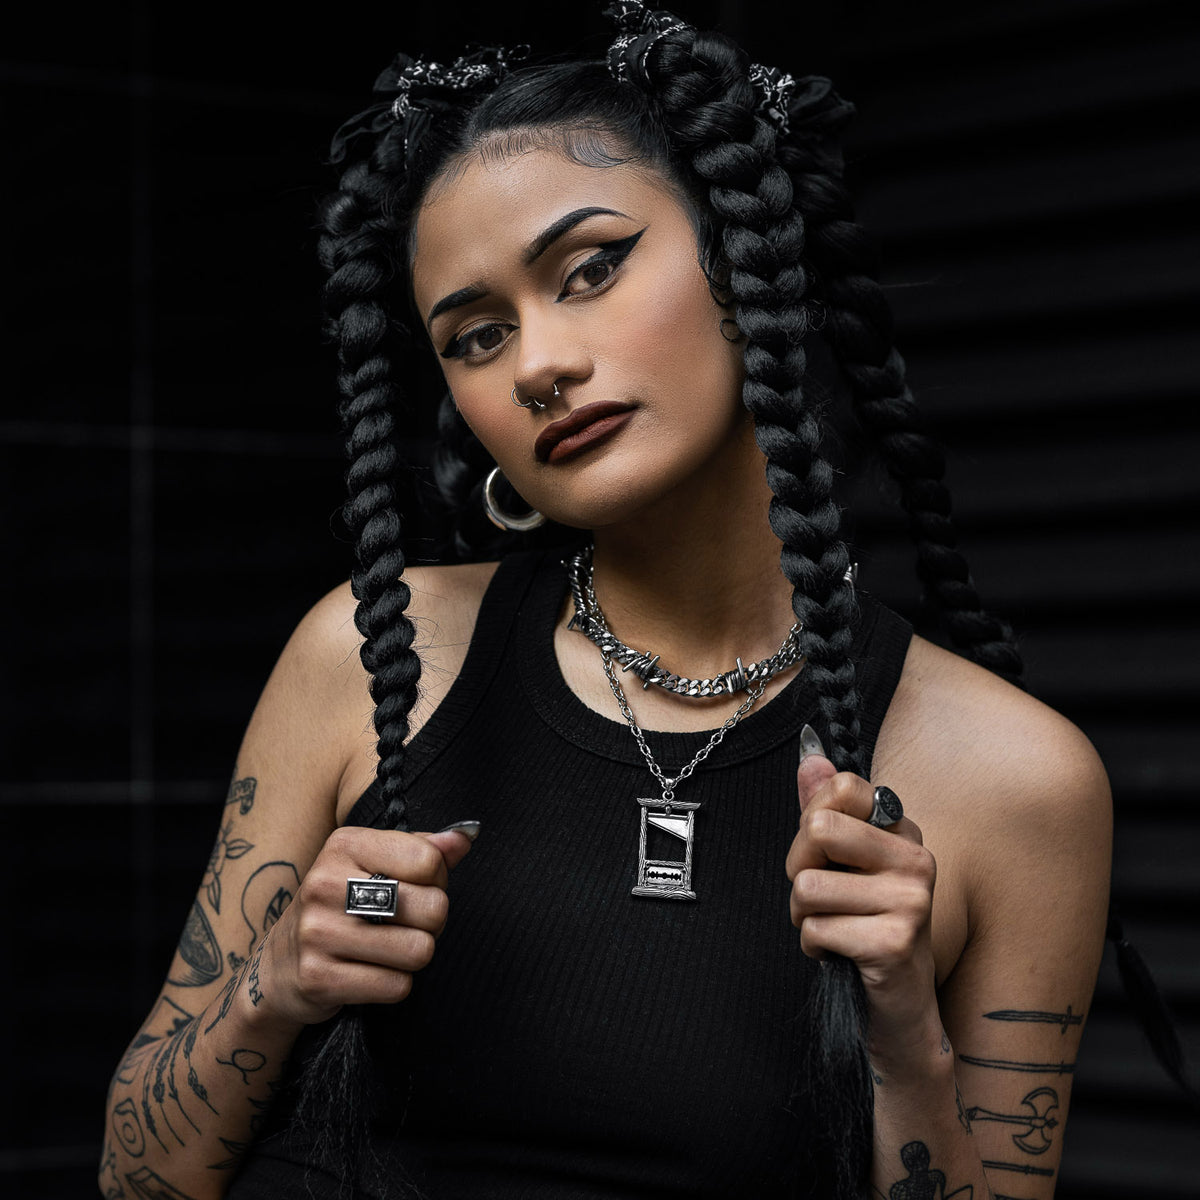 model wearing gothic necklace chains by statement collective